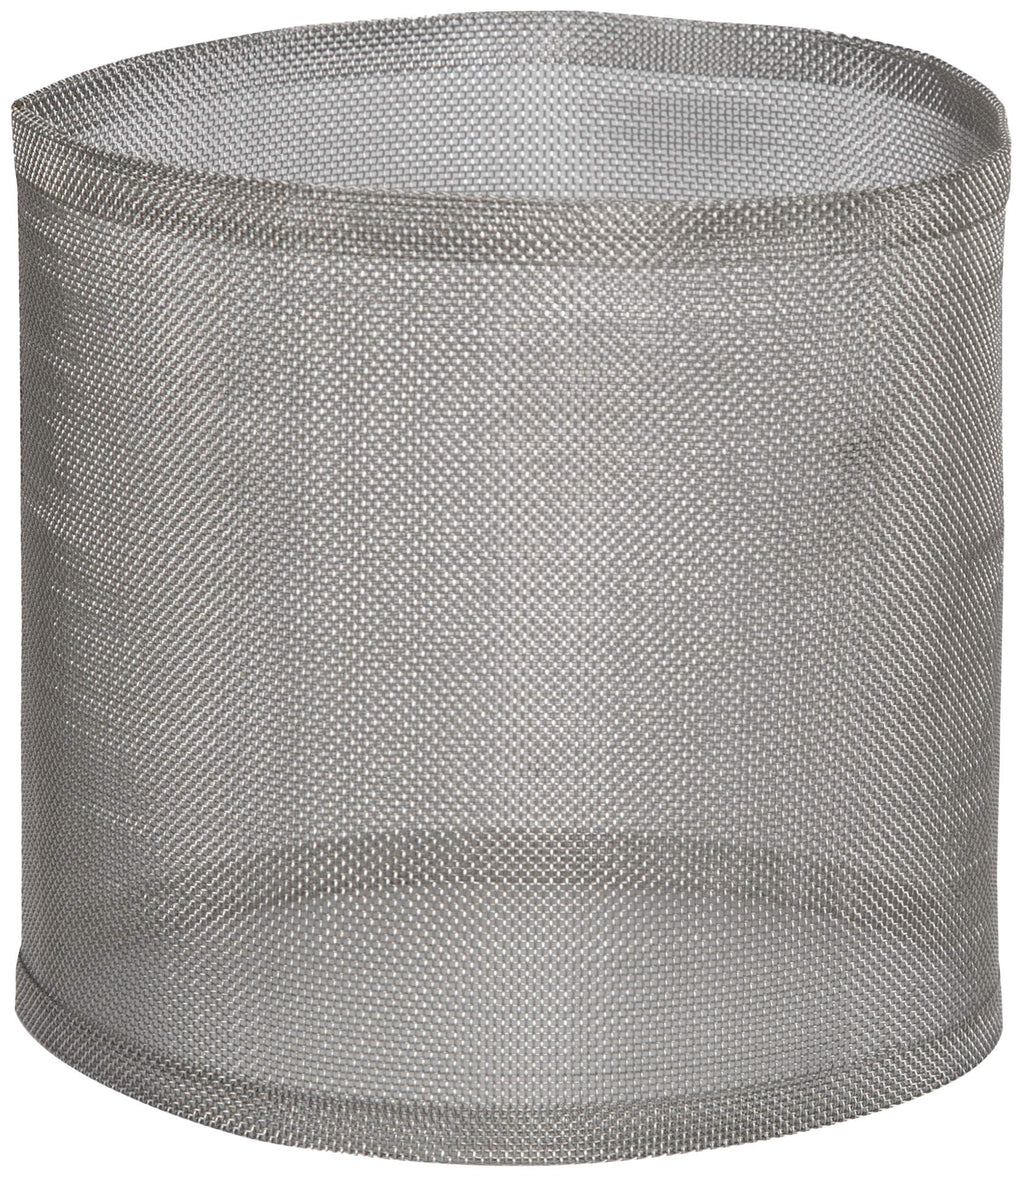 Stansport - Wire Mesh Camp Lantern Globe Replacement (Stainless Steel) - BeesActive Australia